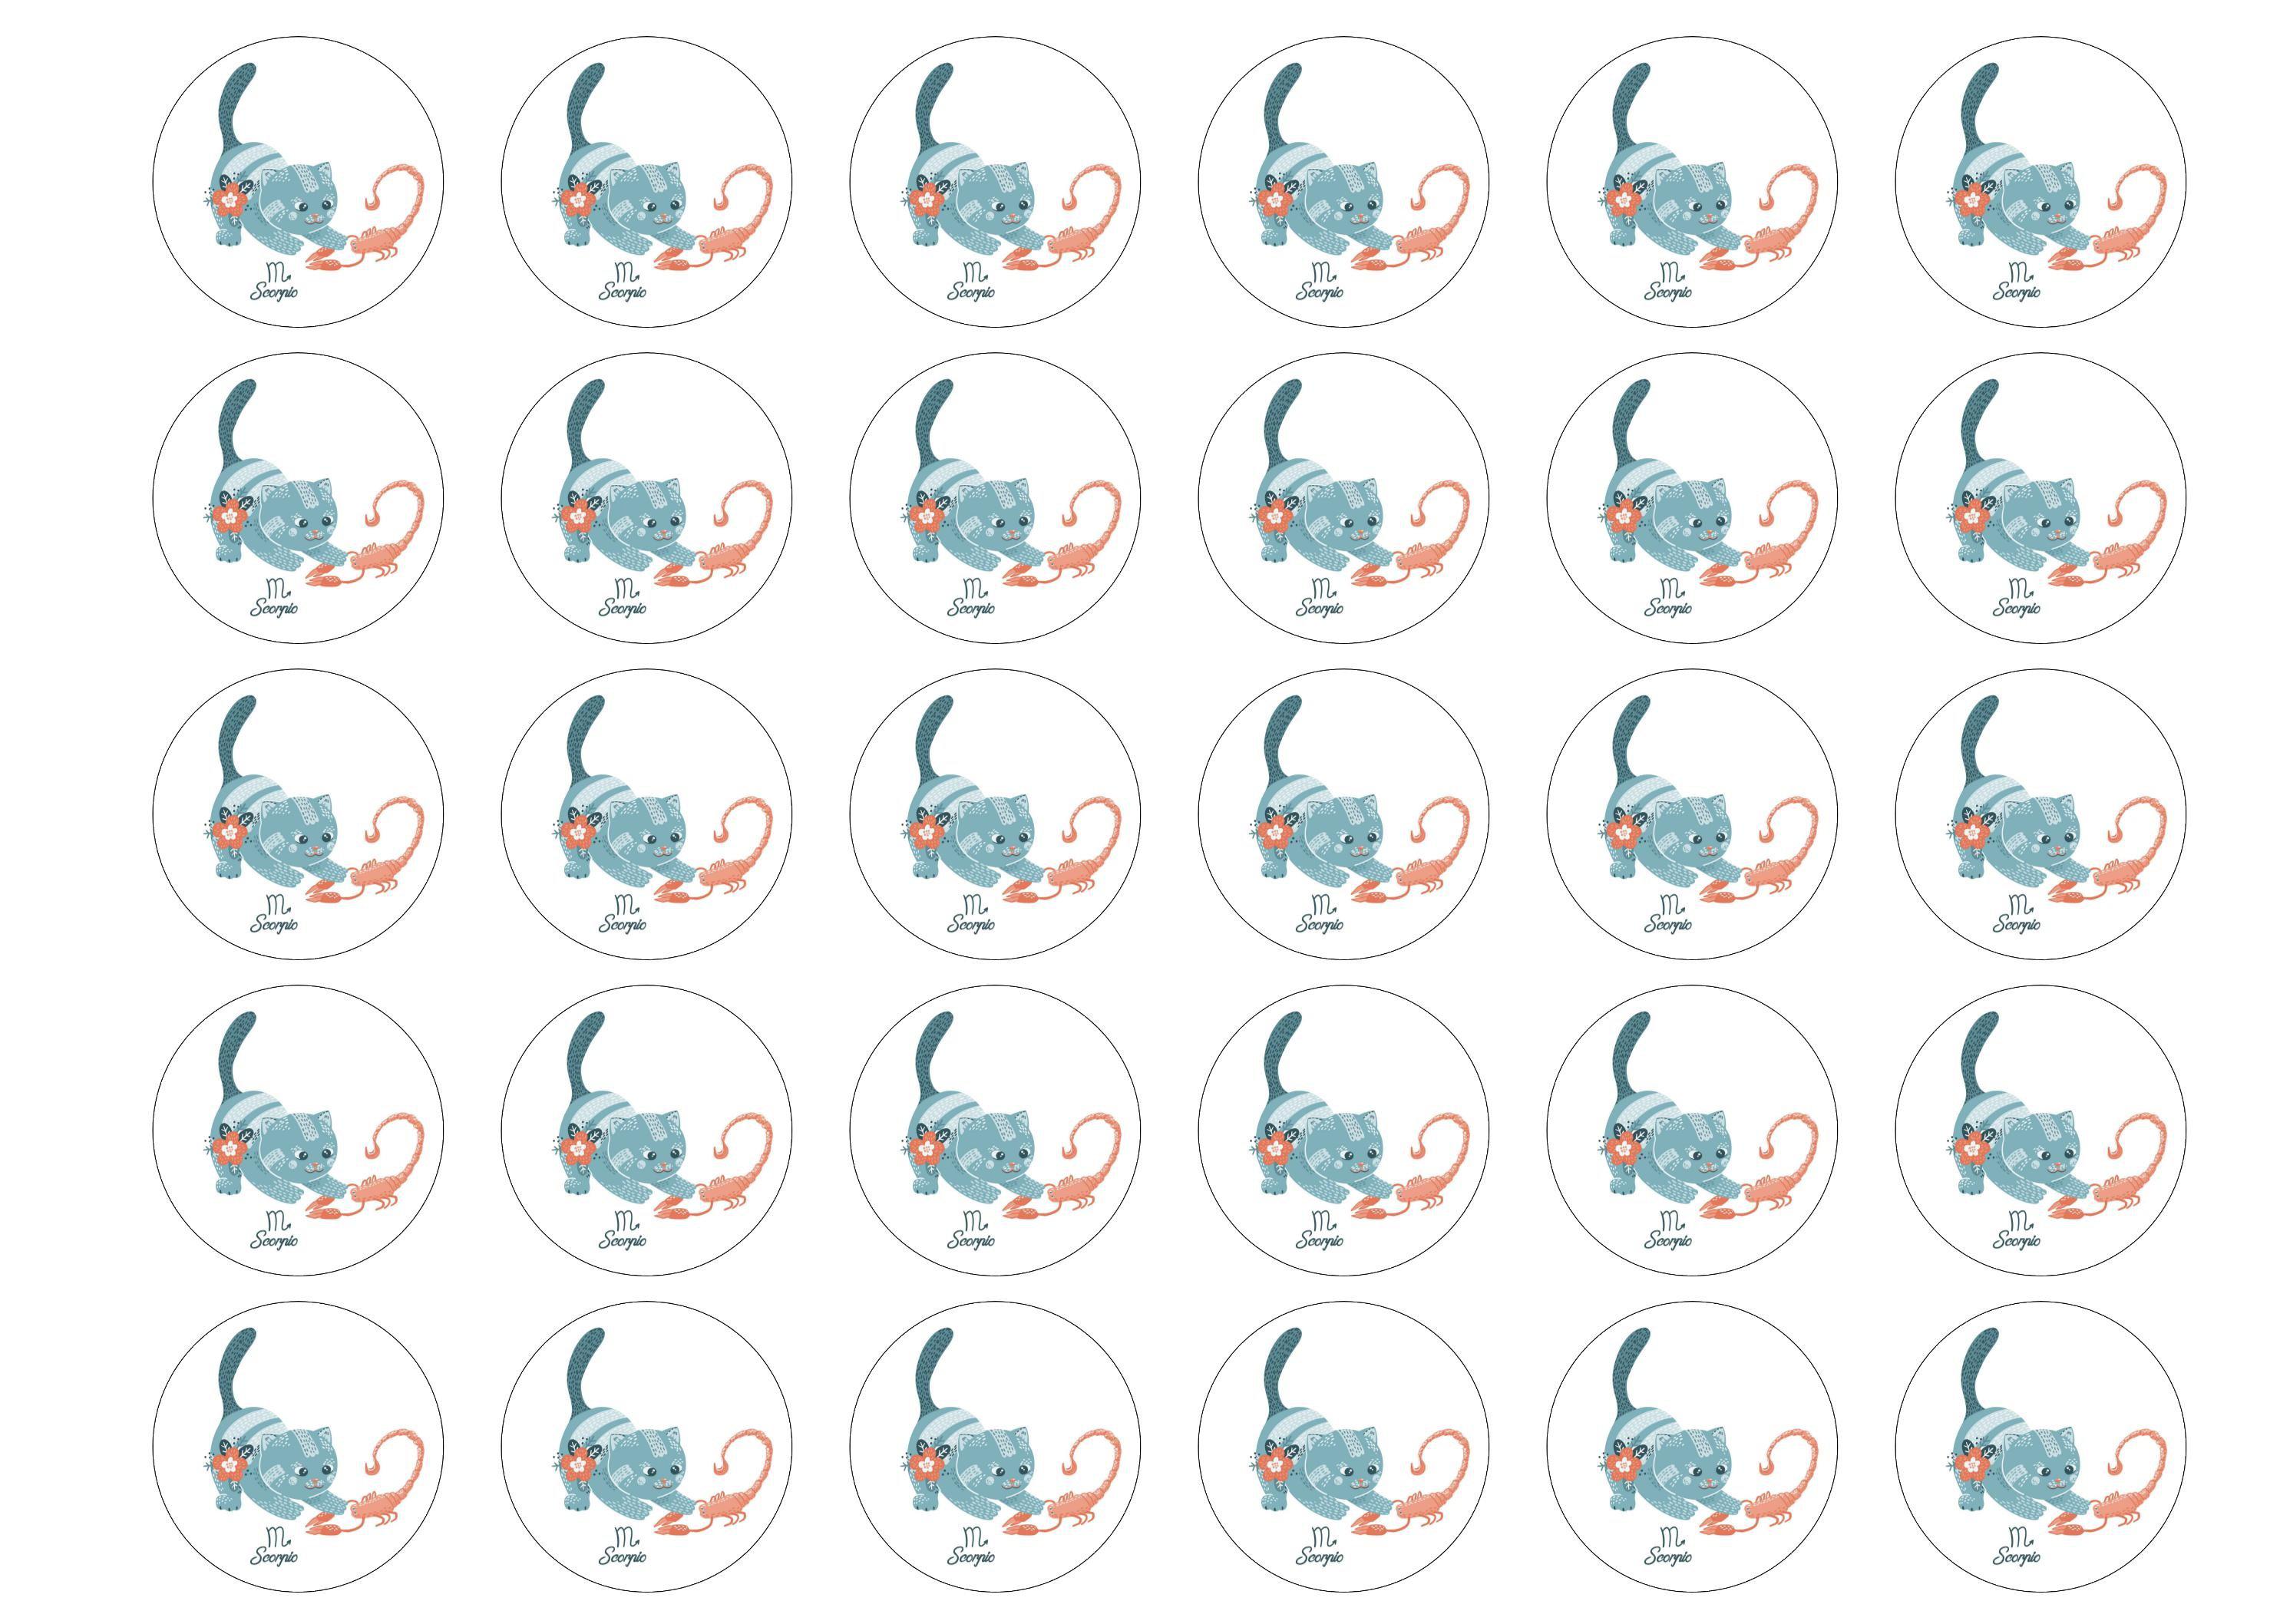 30 edible cupcake toppers with cute cats symbolising Scorpio the Scorpion Star Sign